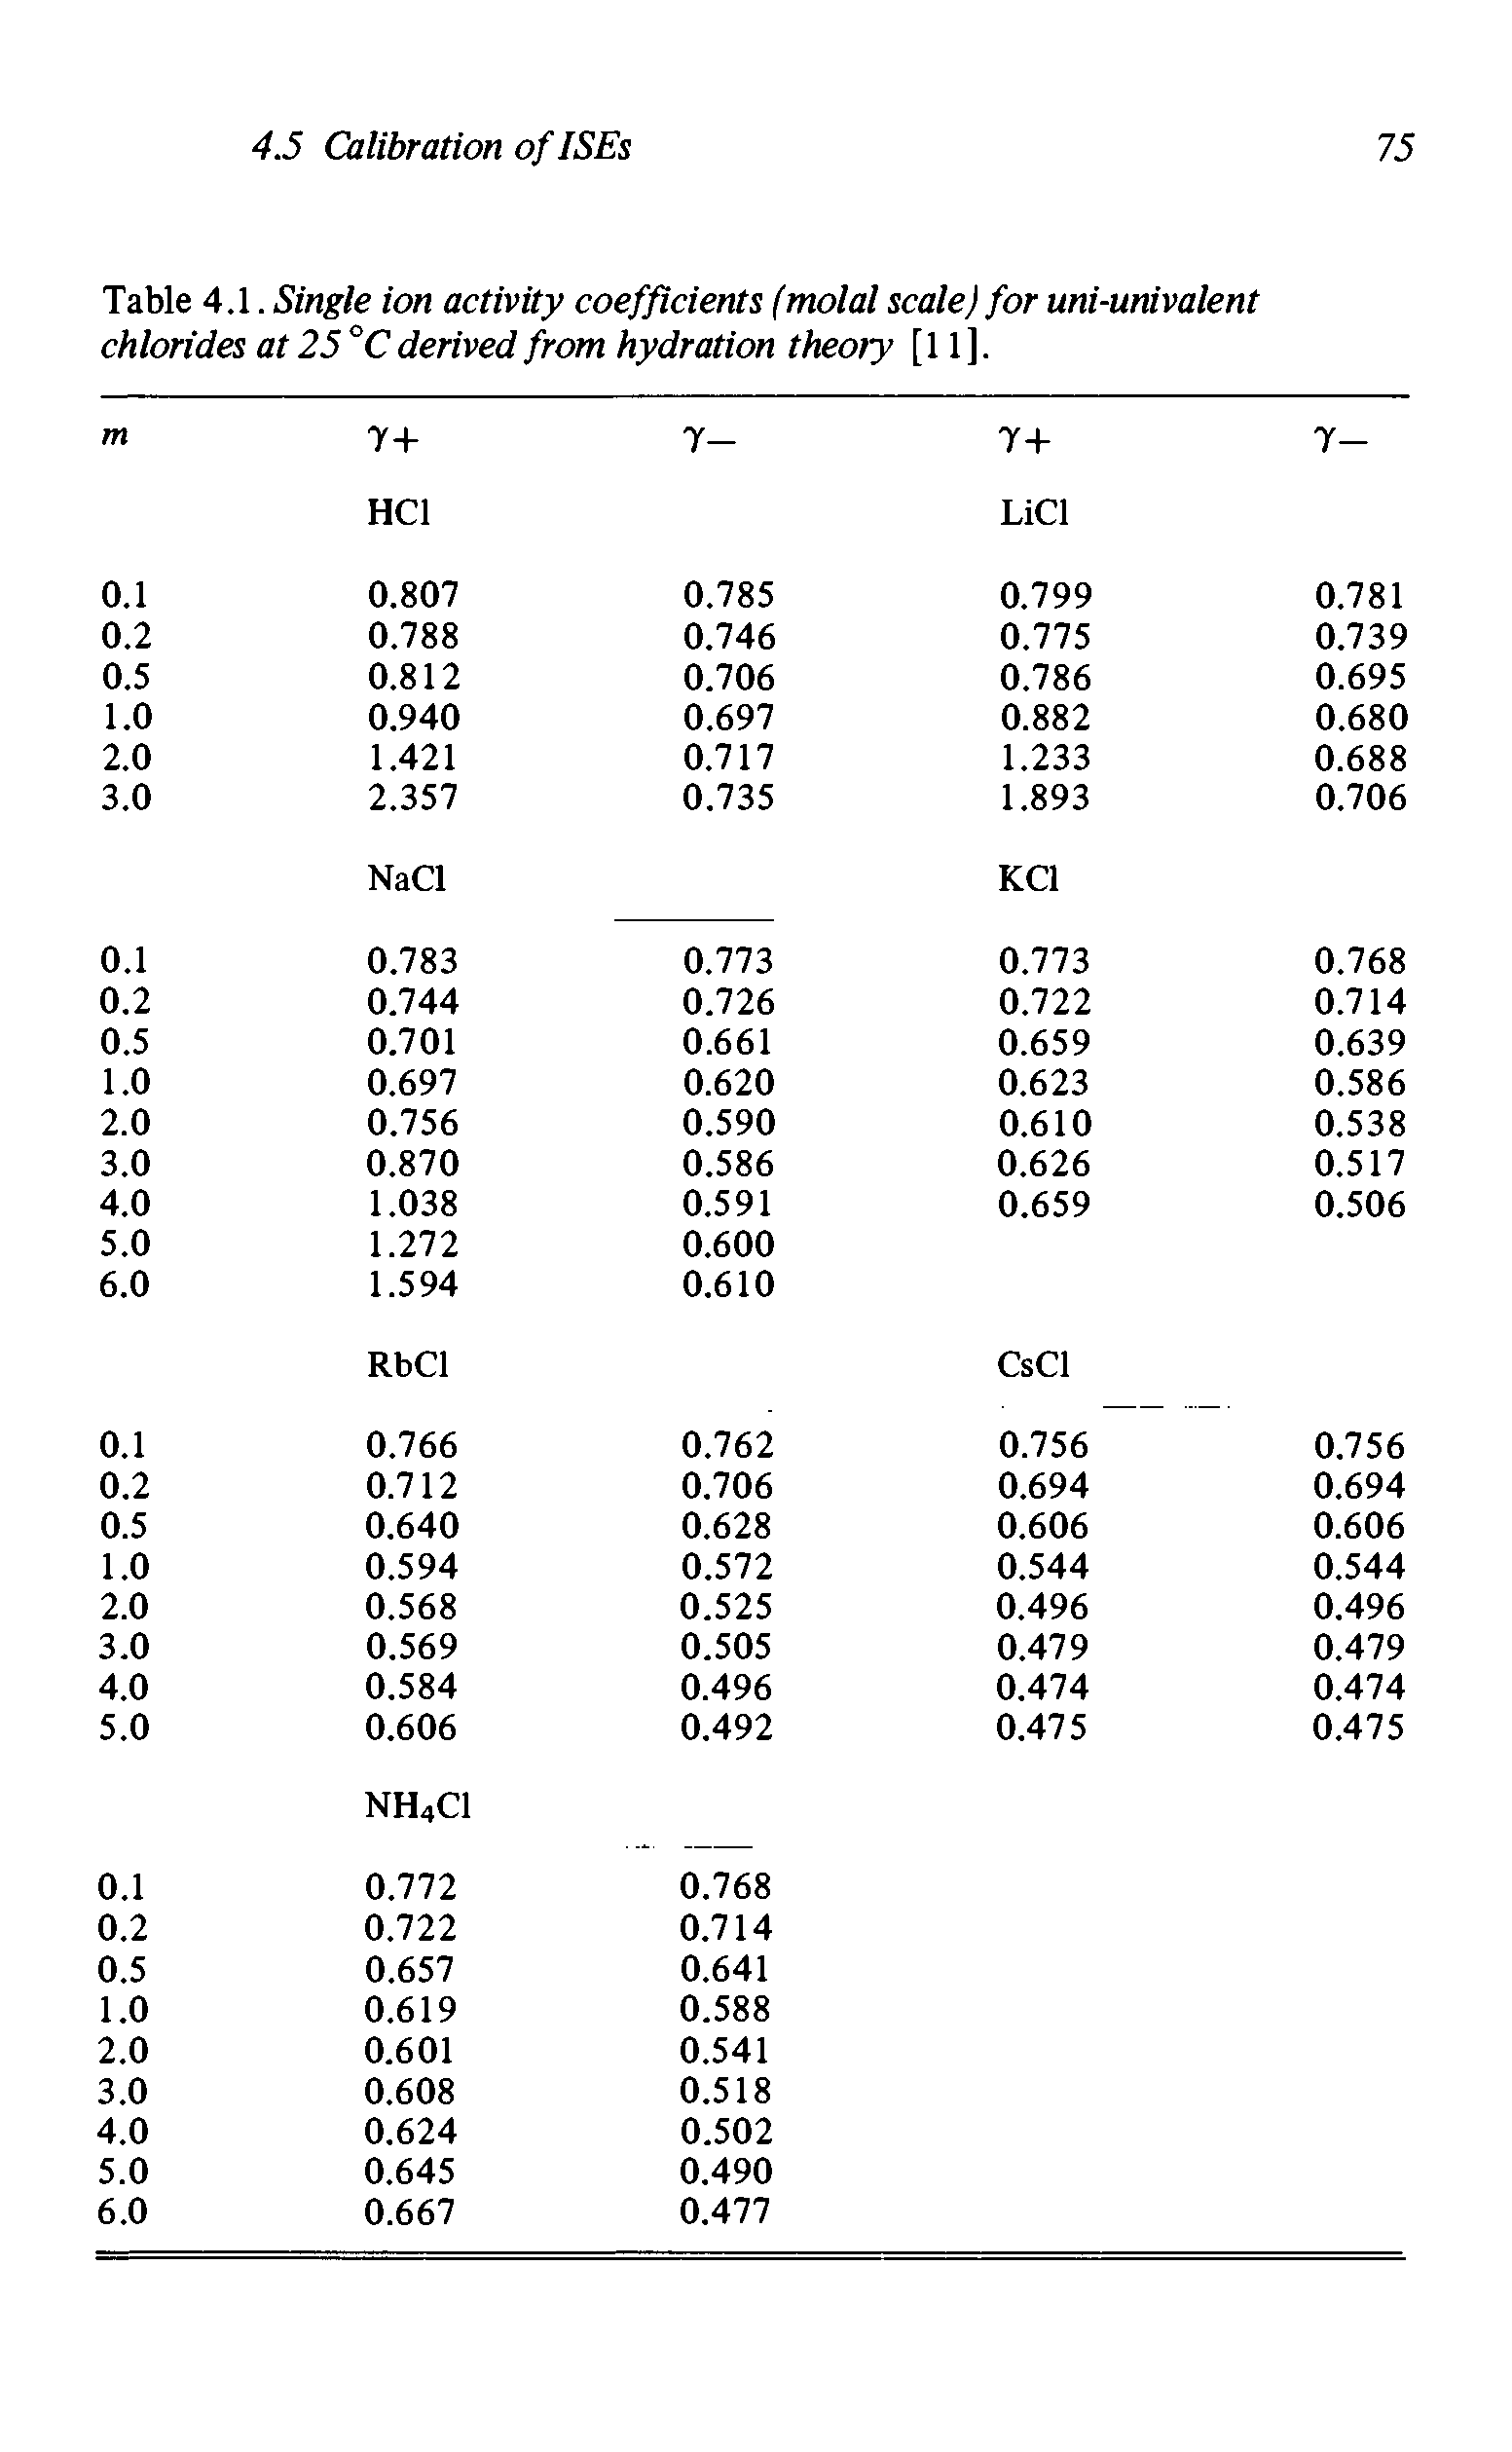 Table 4.1. Single ion activity coefficients (molal scale) for uni-univalent chlorides at 25° C derived from hydration theory [11].